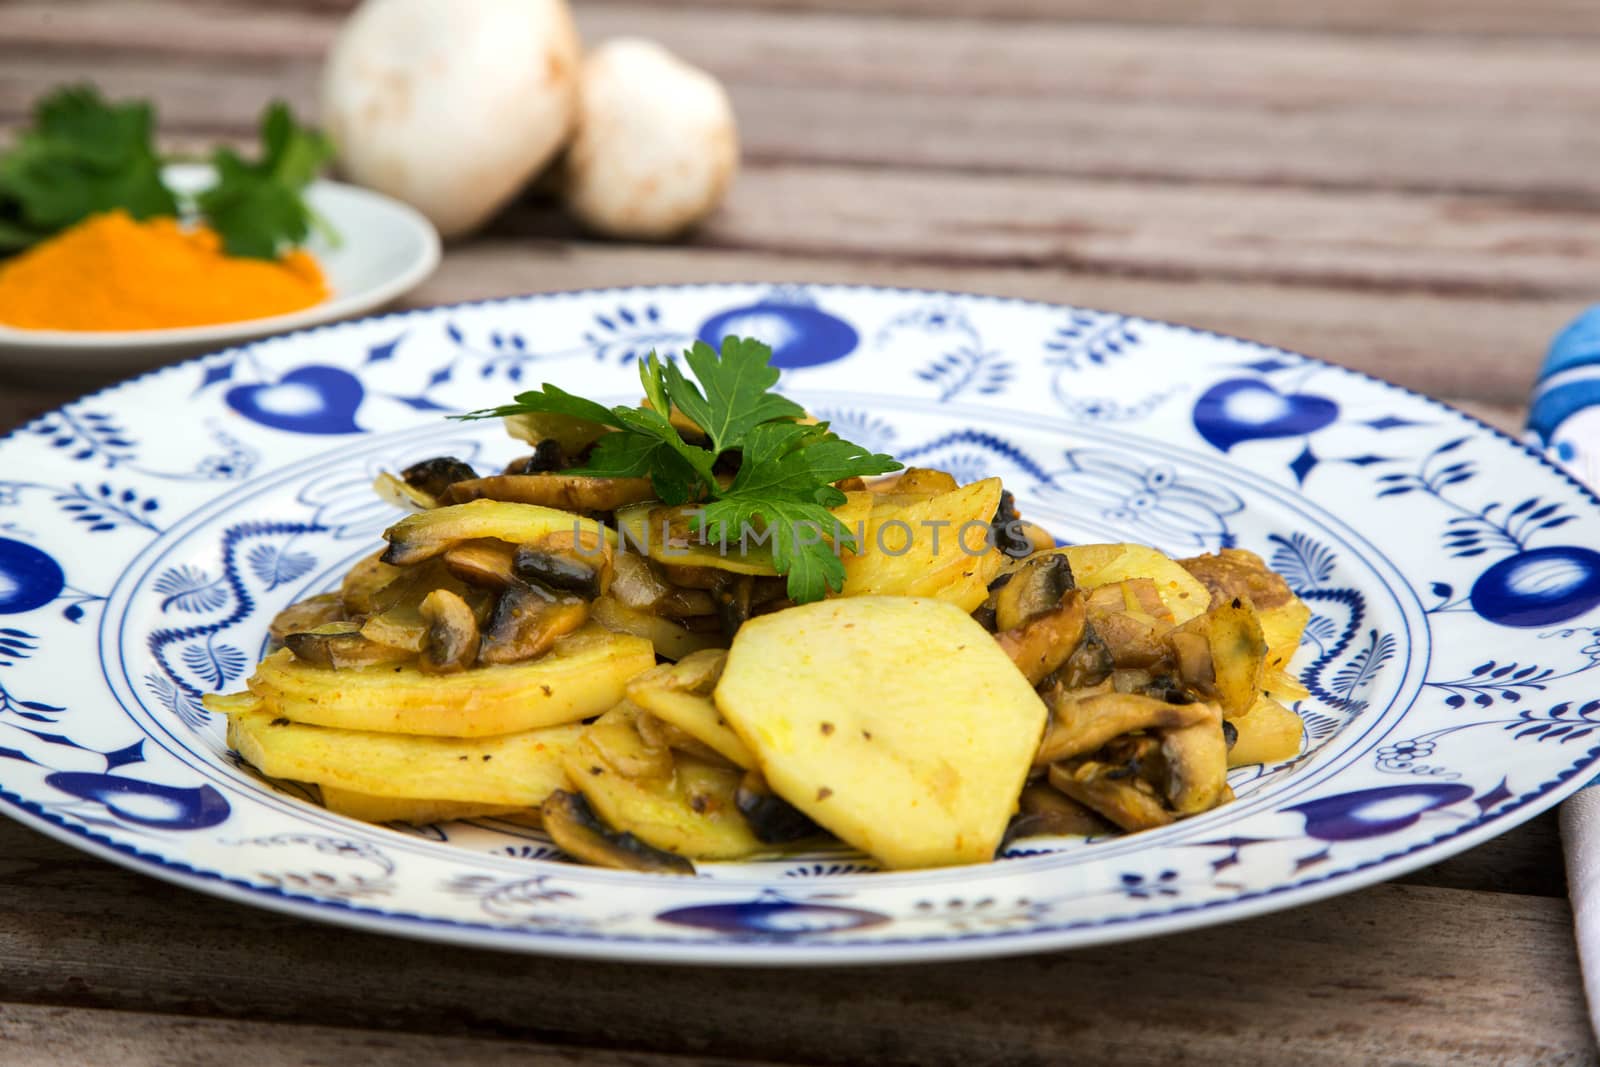 Baked potatoes with mushrooms and curcuma. Decorated by fresh parsley.Ingredients in the background